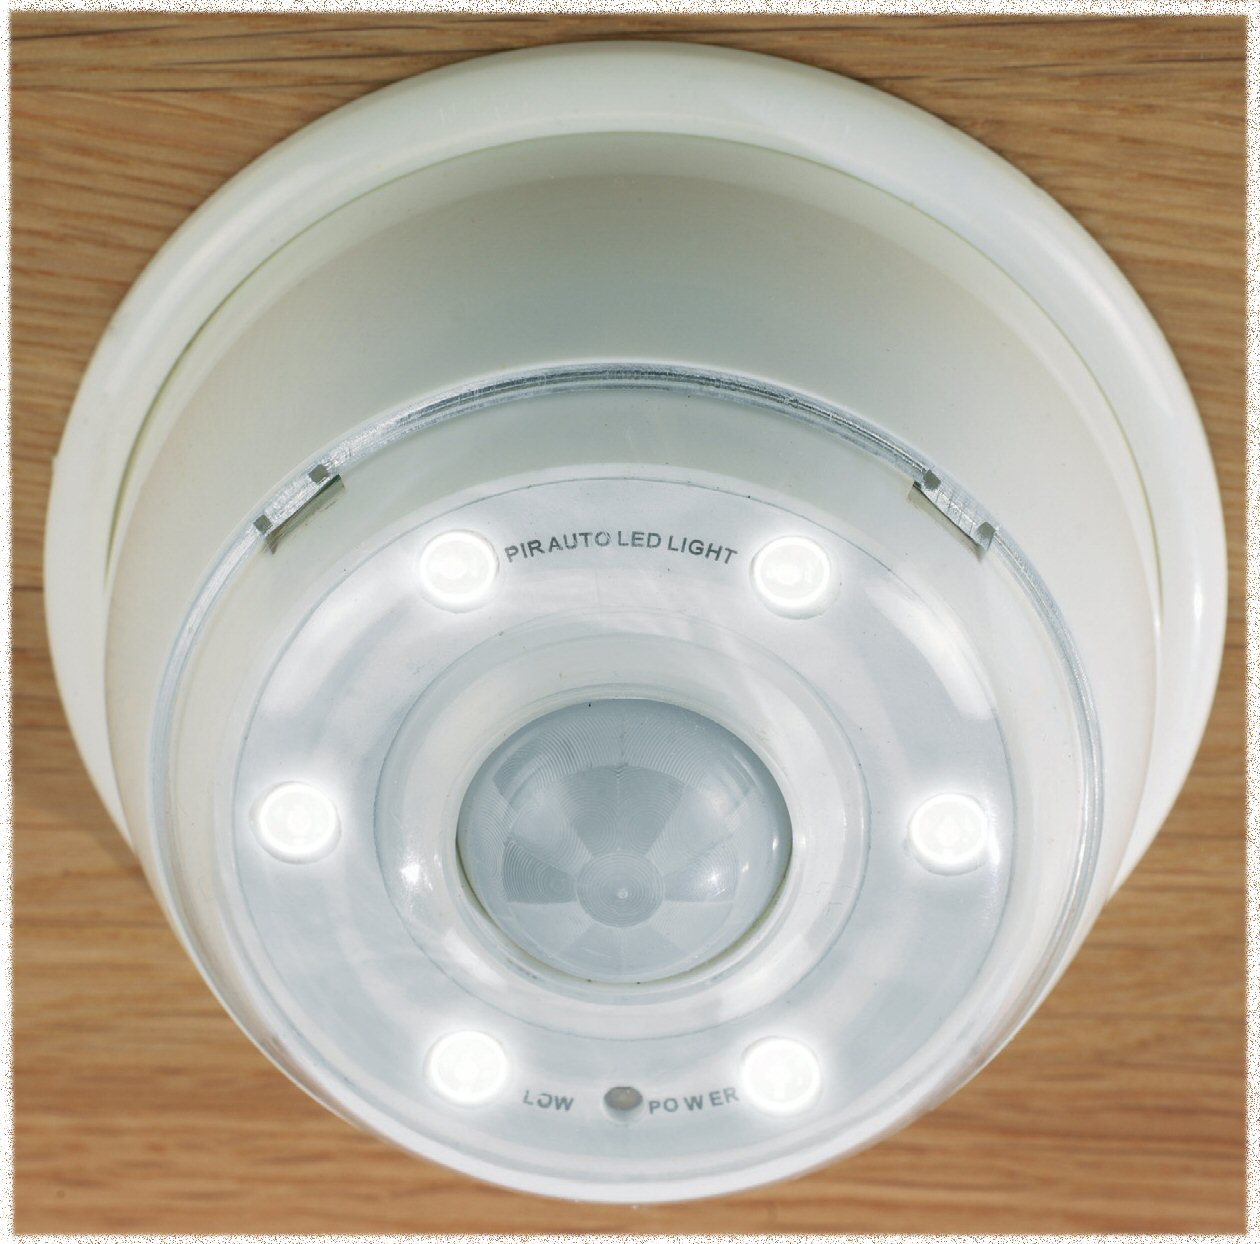 This motion activated PIR sensor light includes a 180 degree sensor that can detect movement up to t